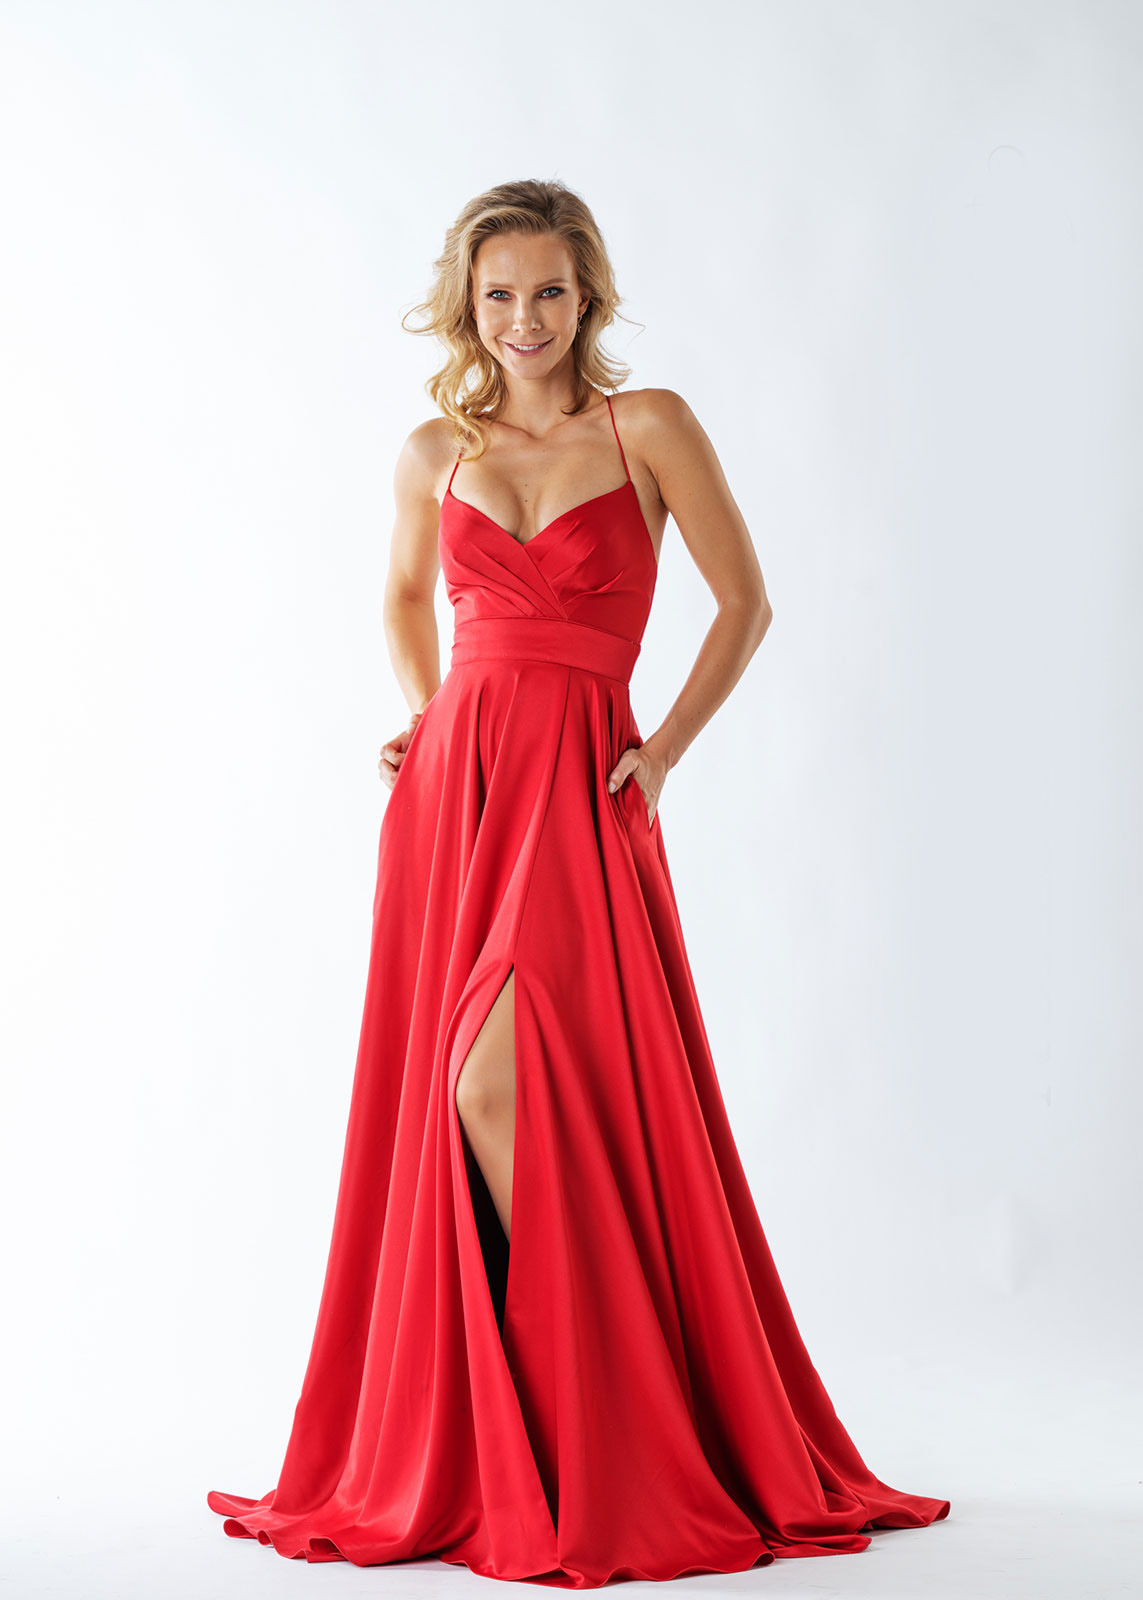 The truly elegant and flowng Madalina prom dress from MK Prom in Bletchley Milton Keynes in a fabulous sheer Vibrant Red satin fabric